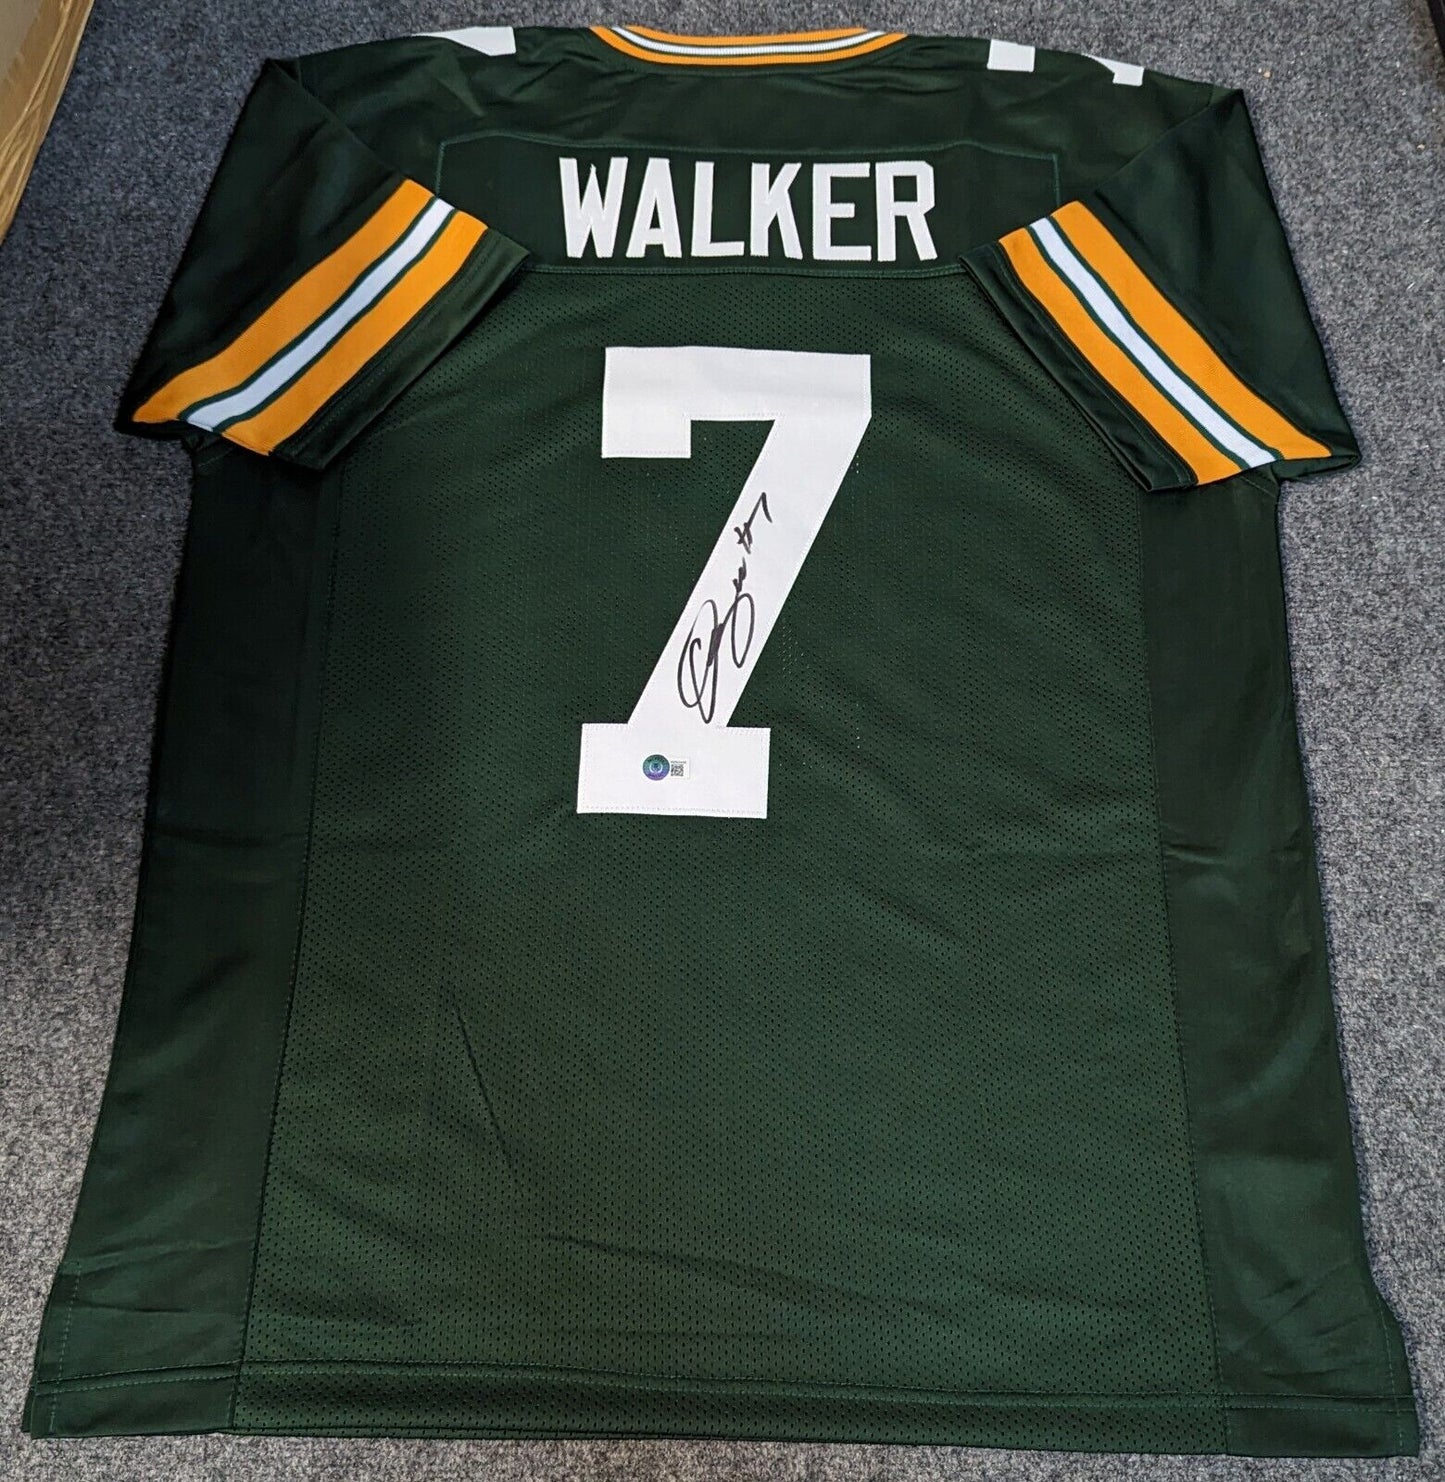 Green Bay Packers Quay Walker Autographed Signed Jersey Beckett Holo